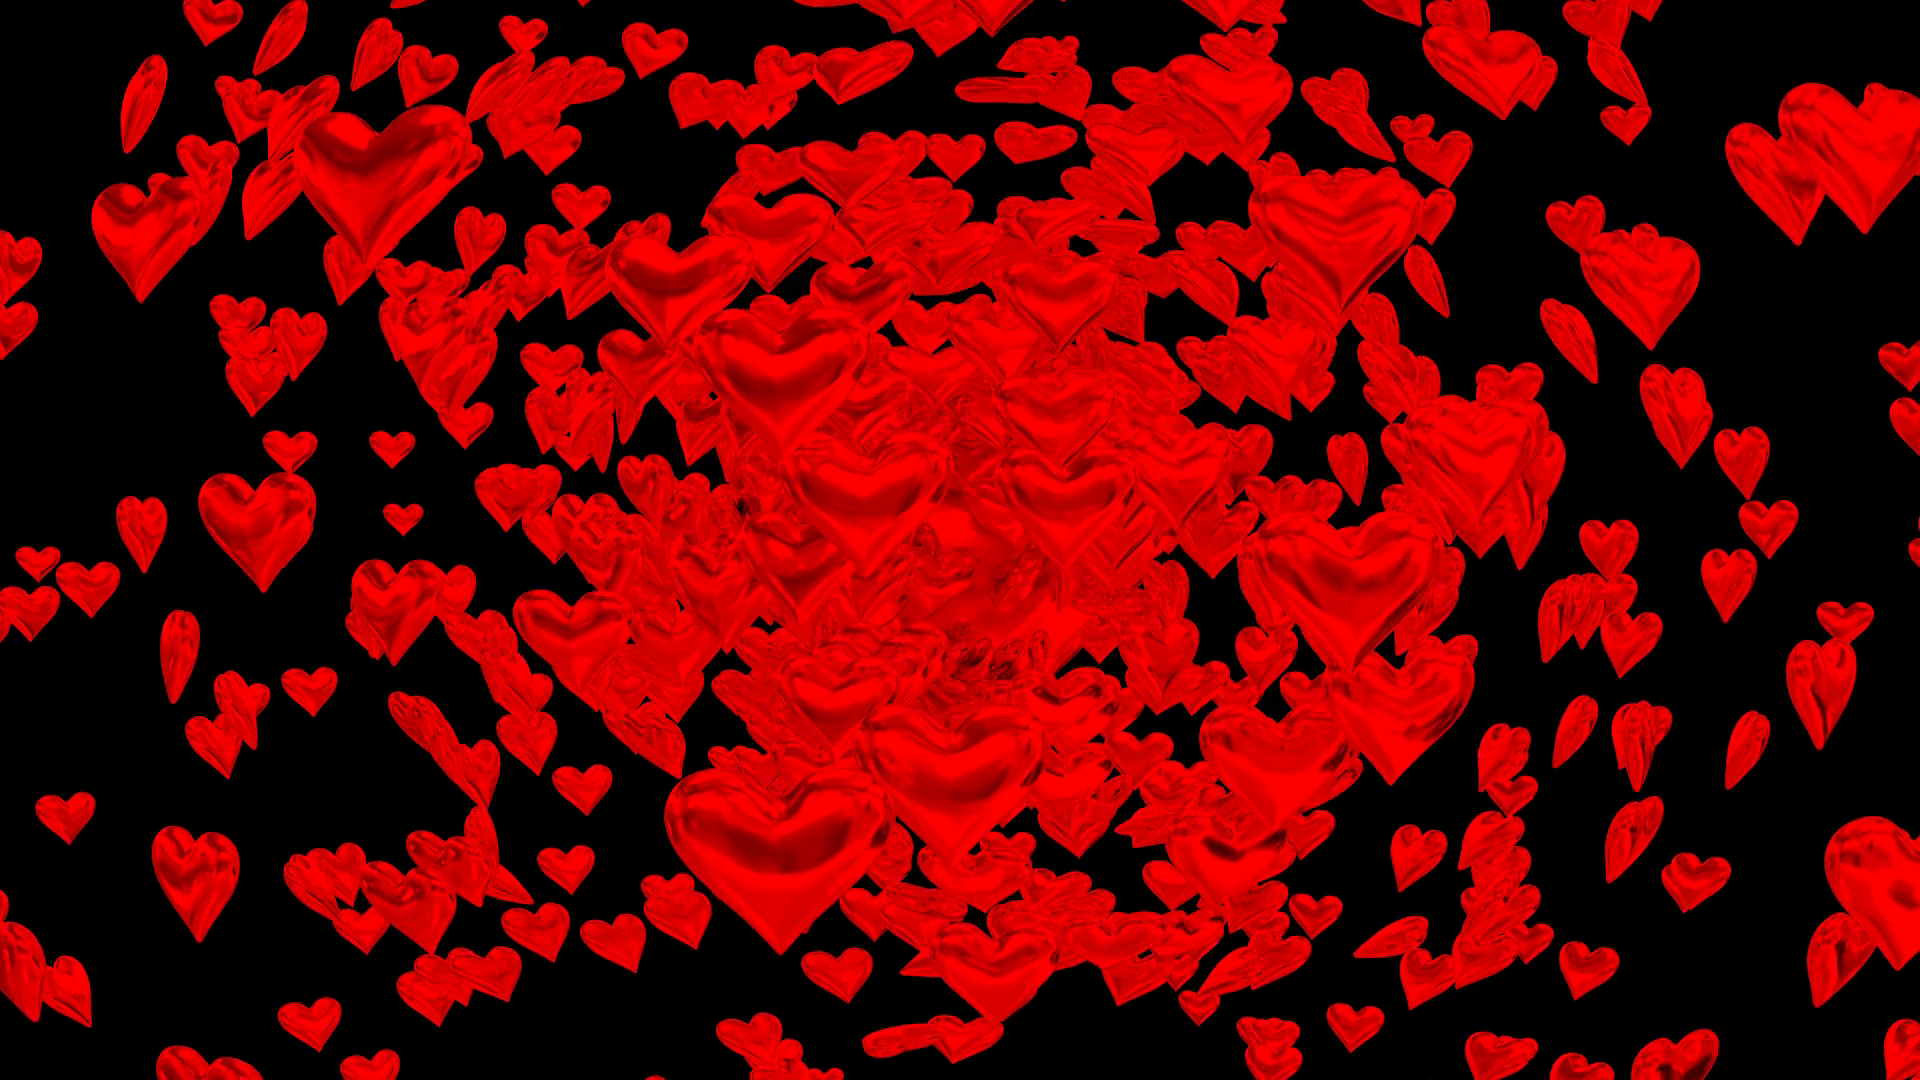 Animated small hearts exploding from large heart against transparent ...